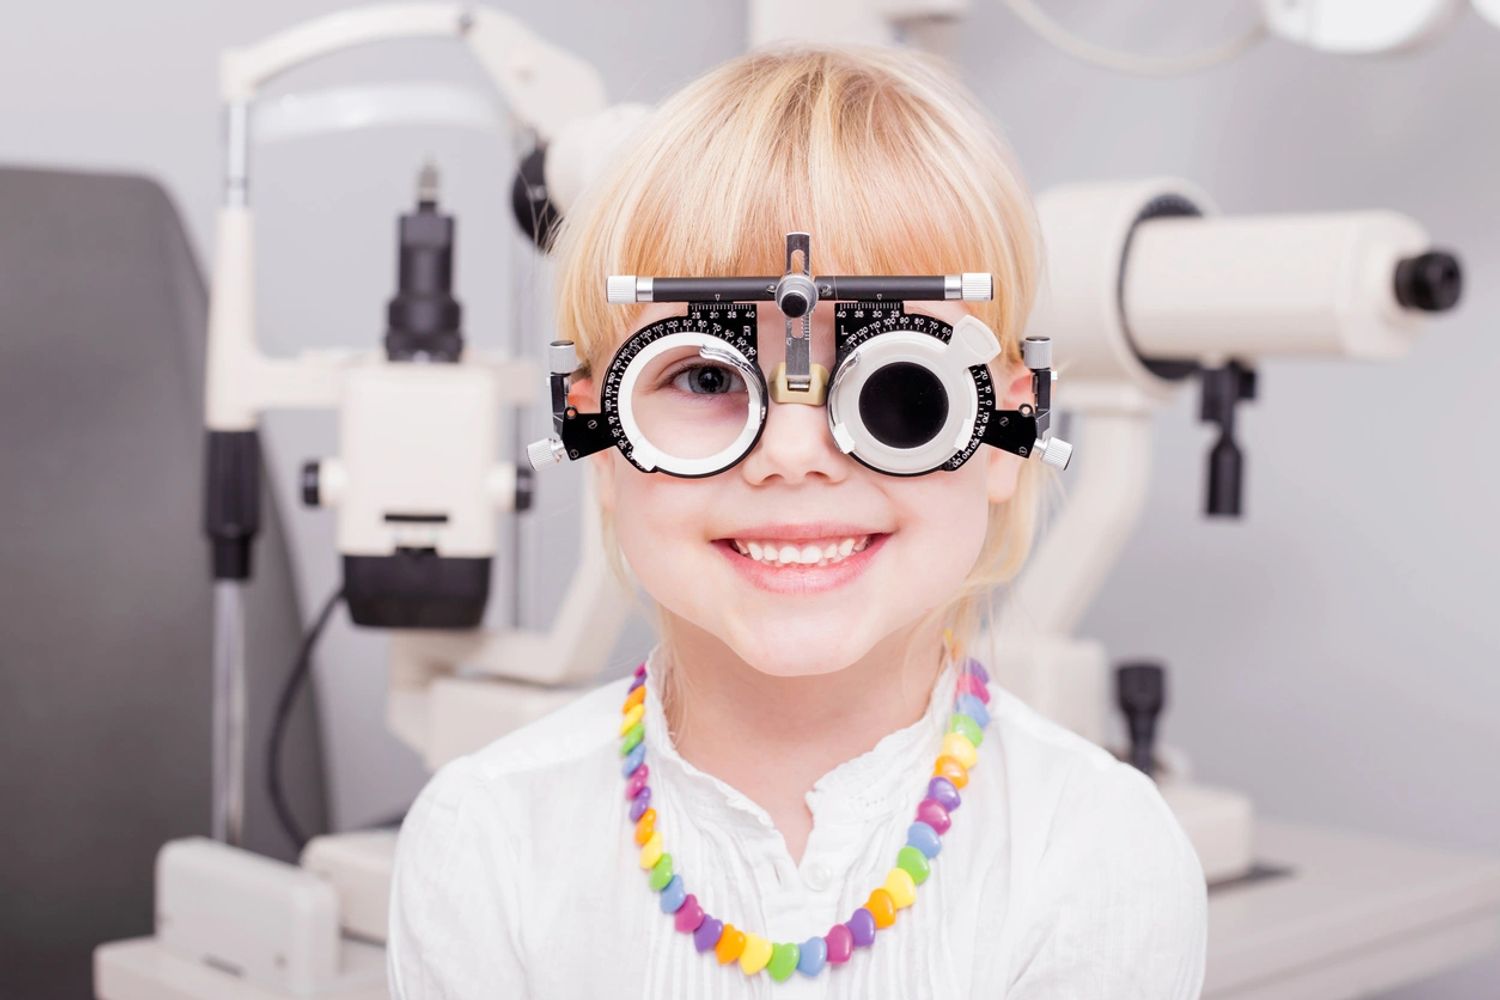 Young girl wearing a white shirt with a rainbow necklace and an optometrist trial frame, smiling. 